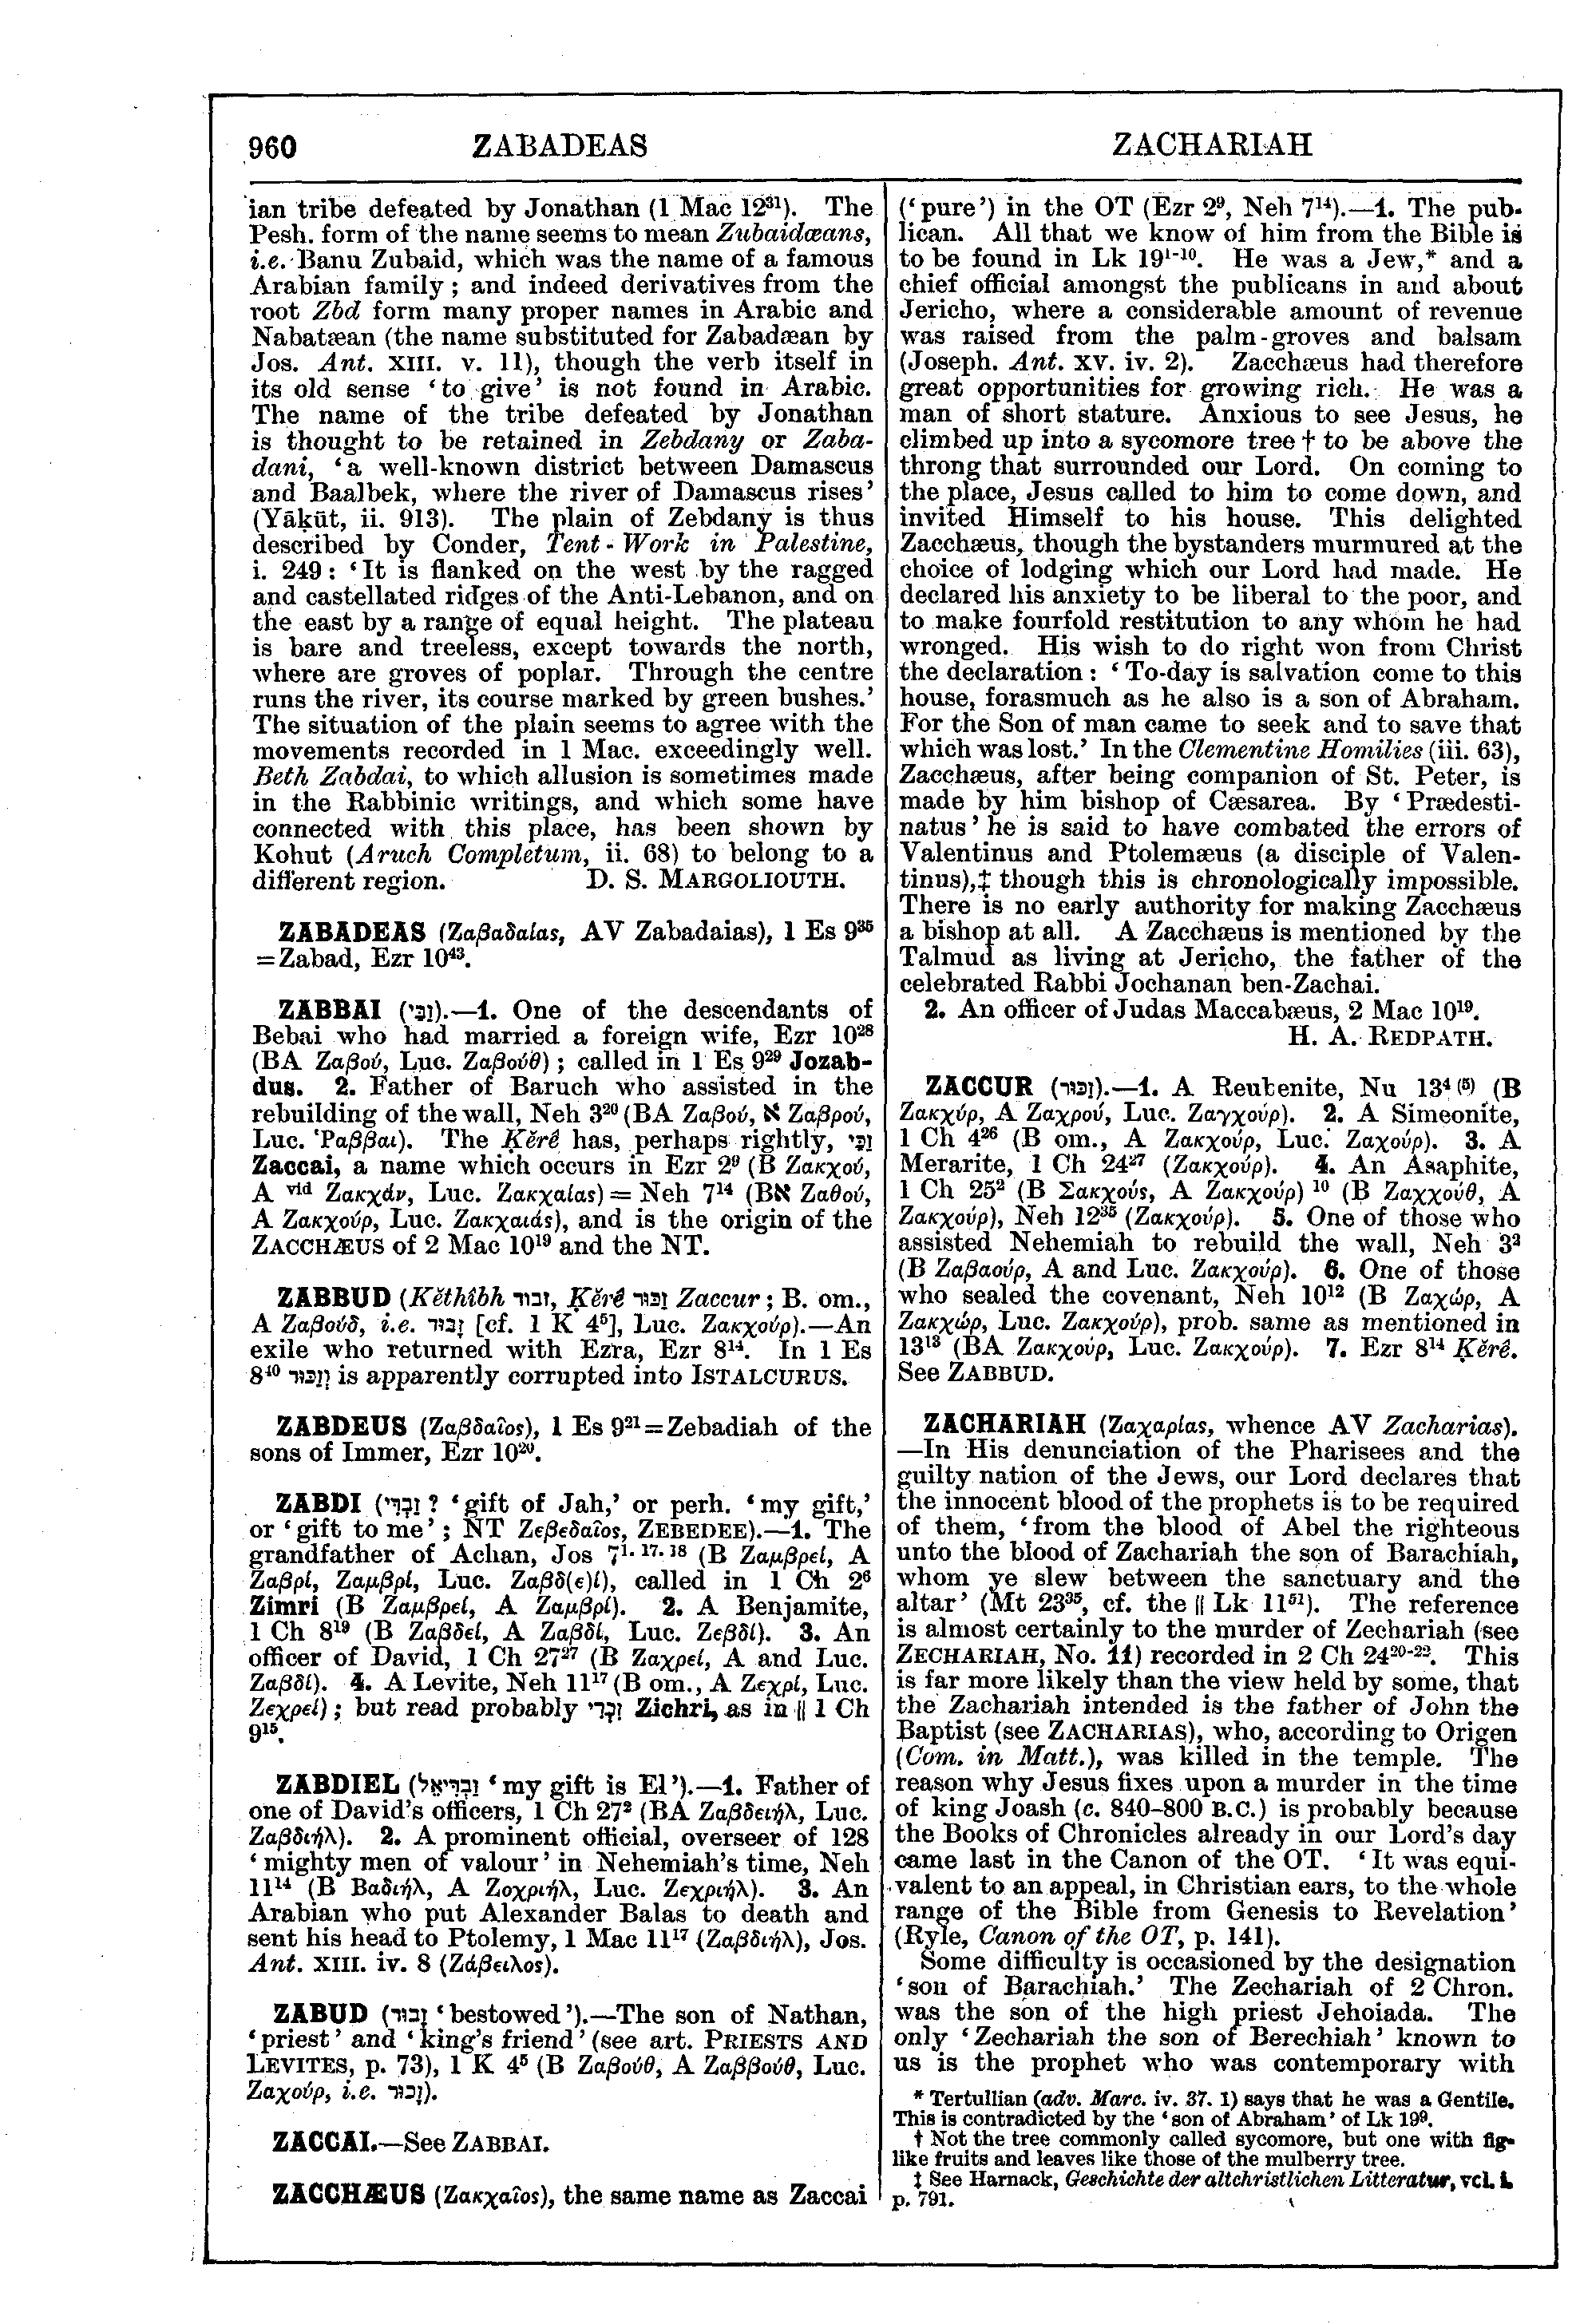 Image of page 960